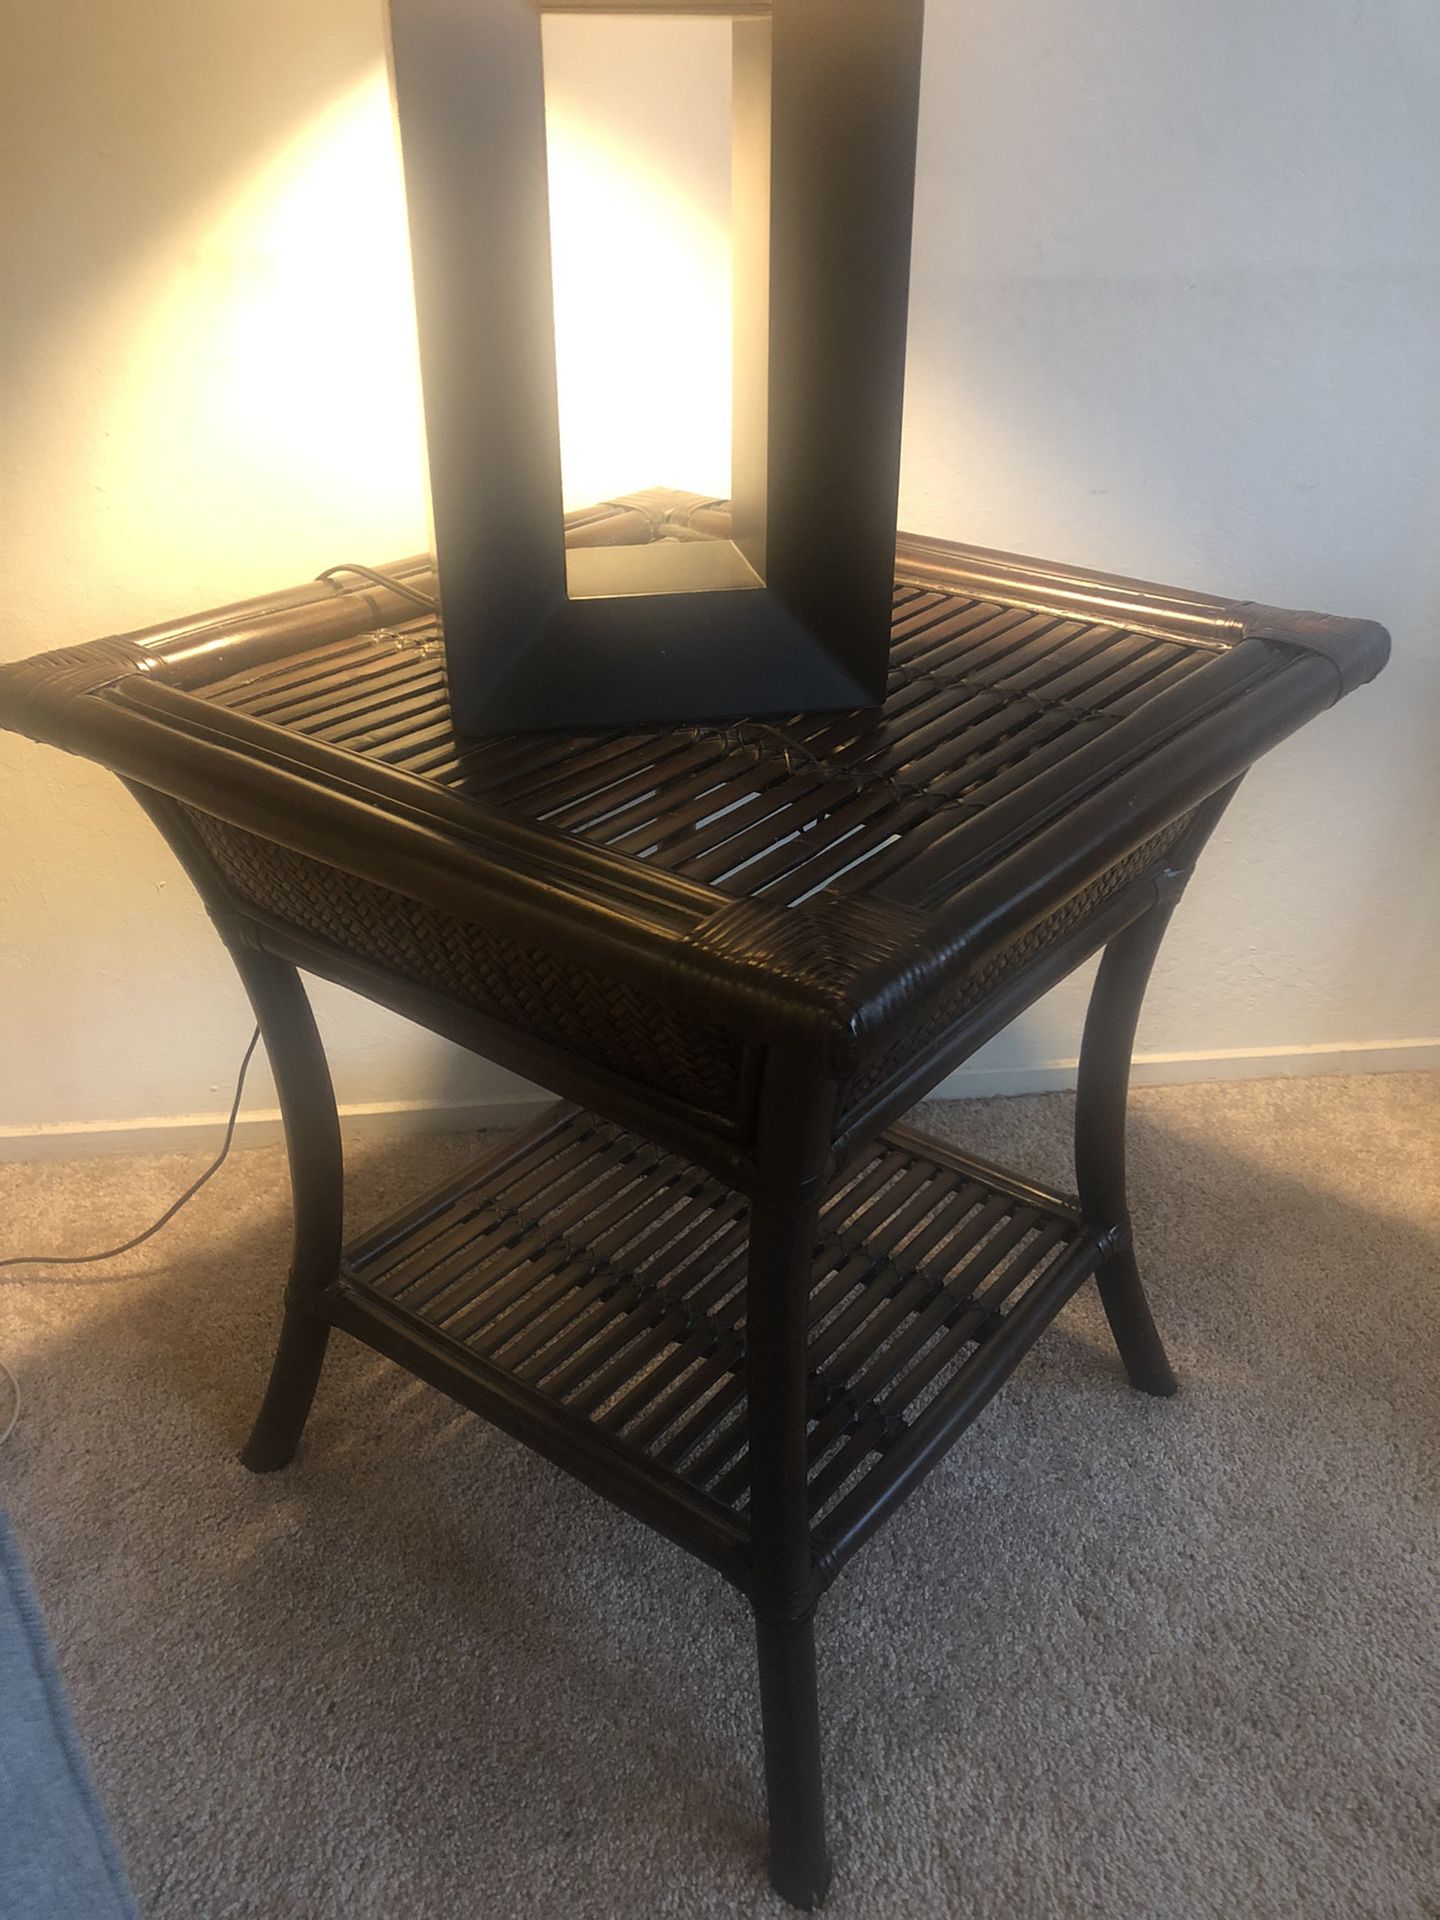 Pier 1 wicker end table - great condition